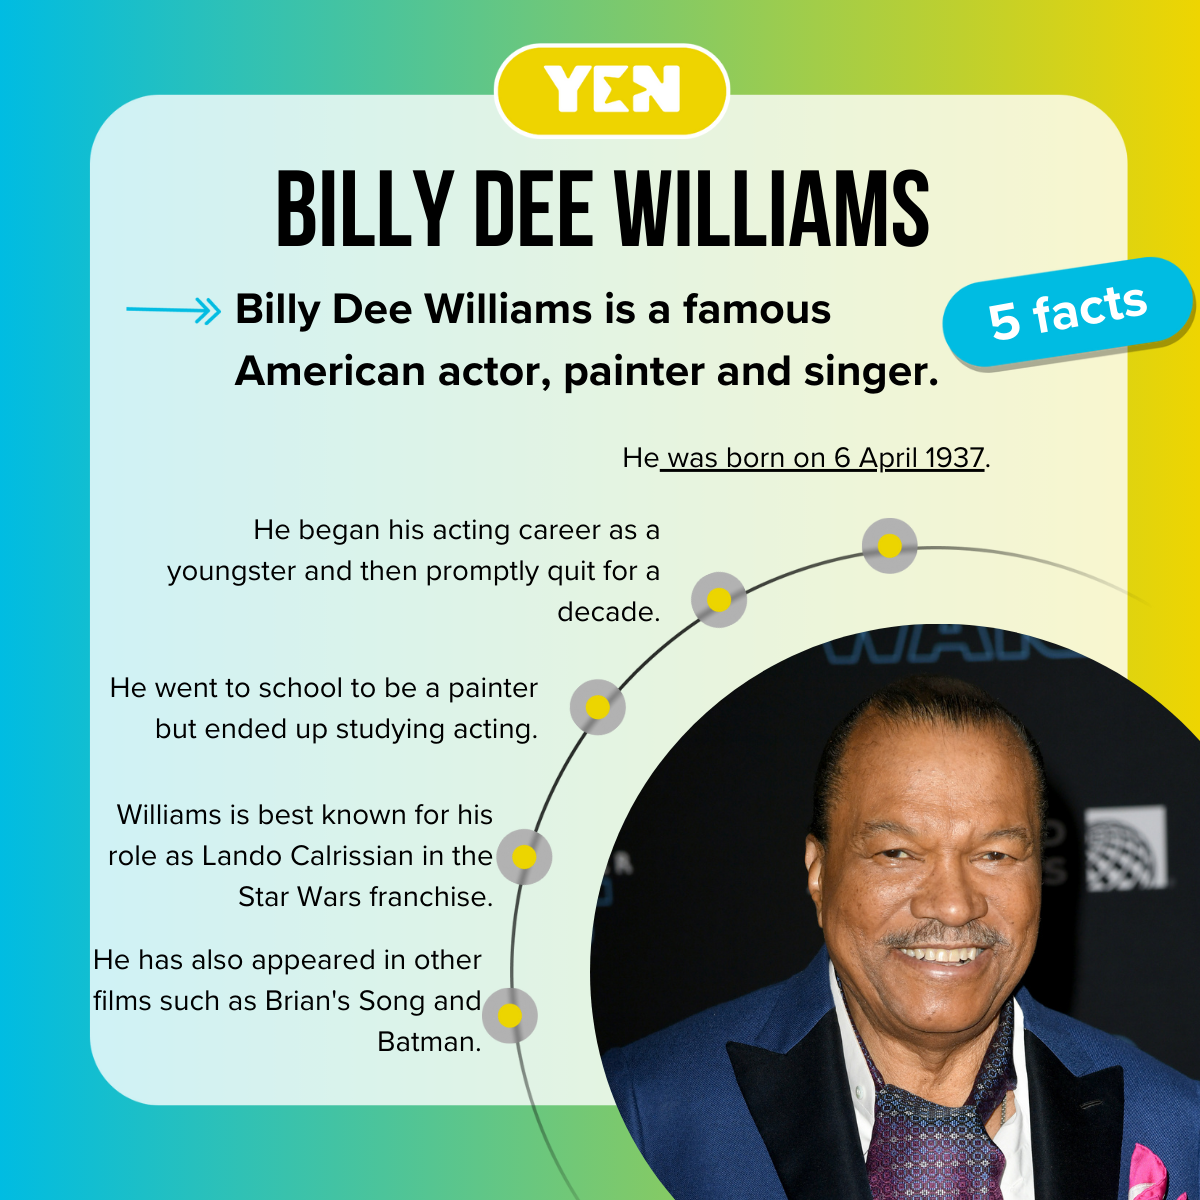 5 facts about Billy Dee Williams